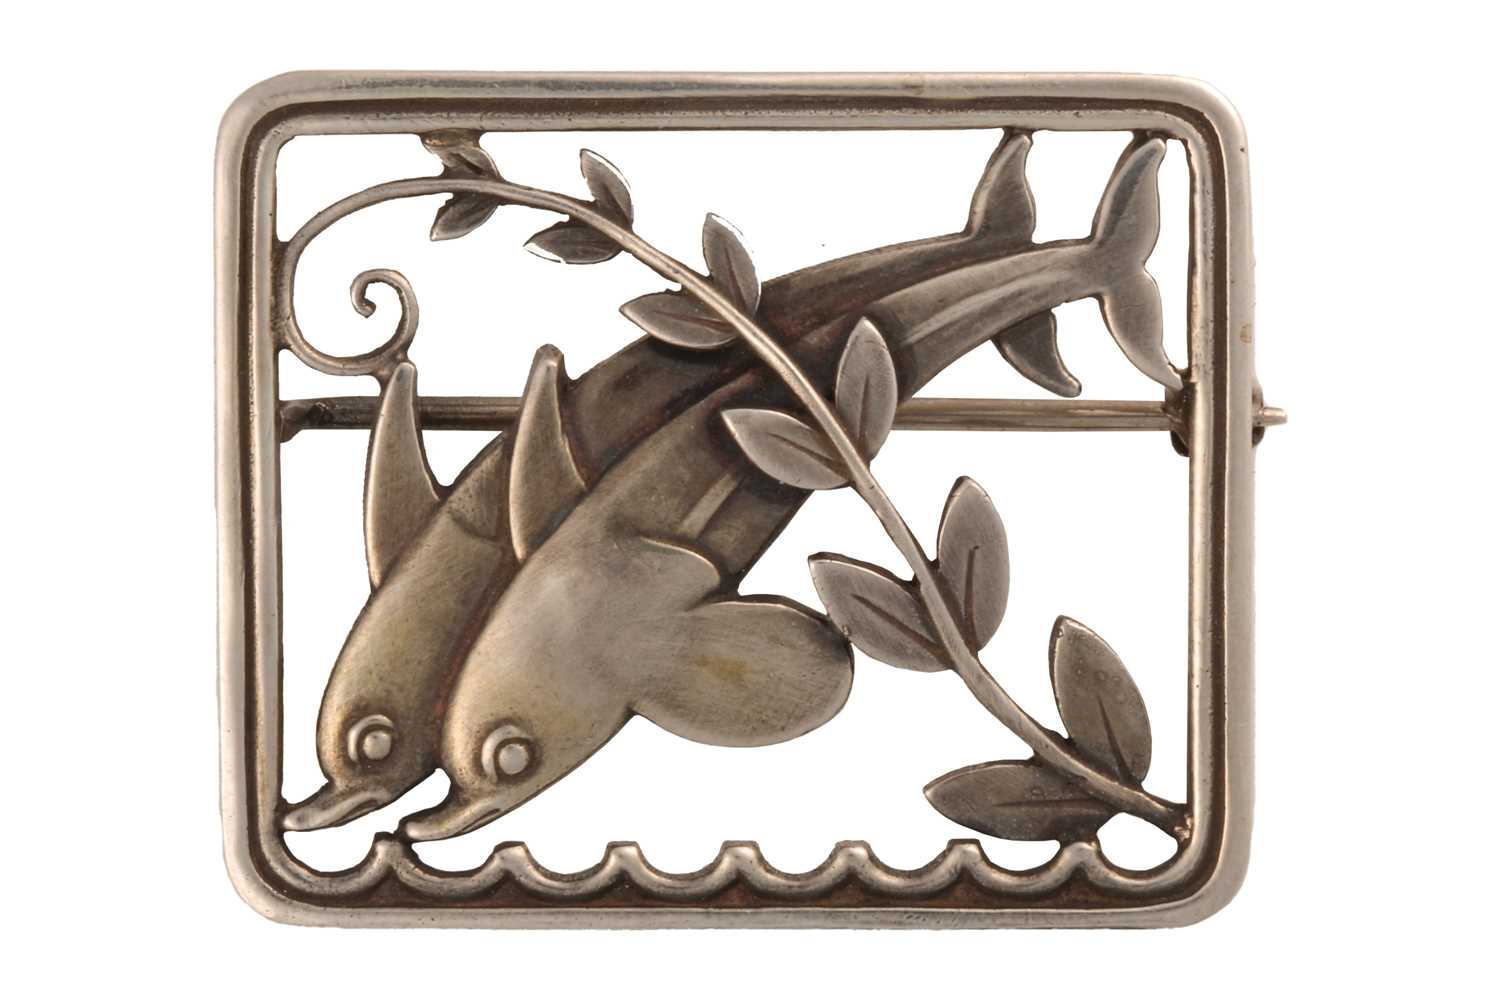 Georg Jensen - A silver 'double dolphin' brooch, depicting two dolphins with a fern motif across